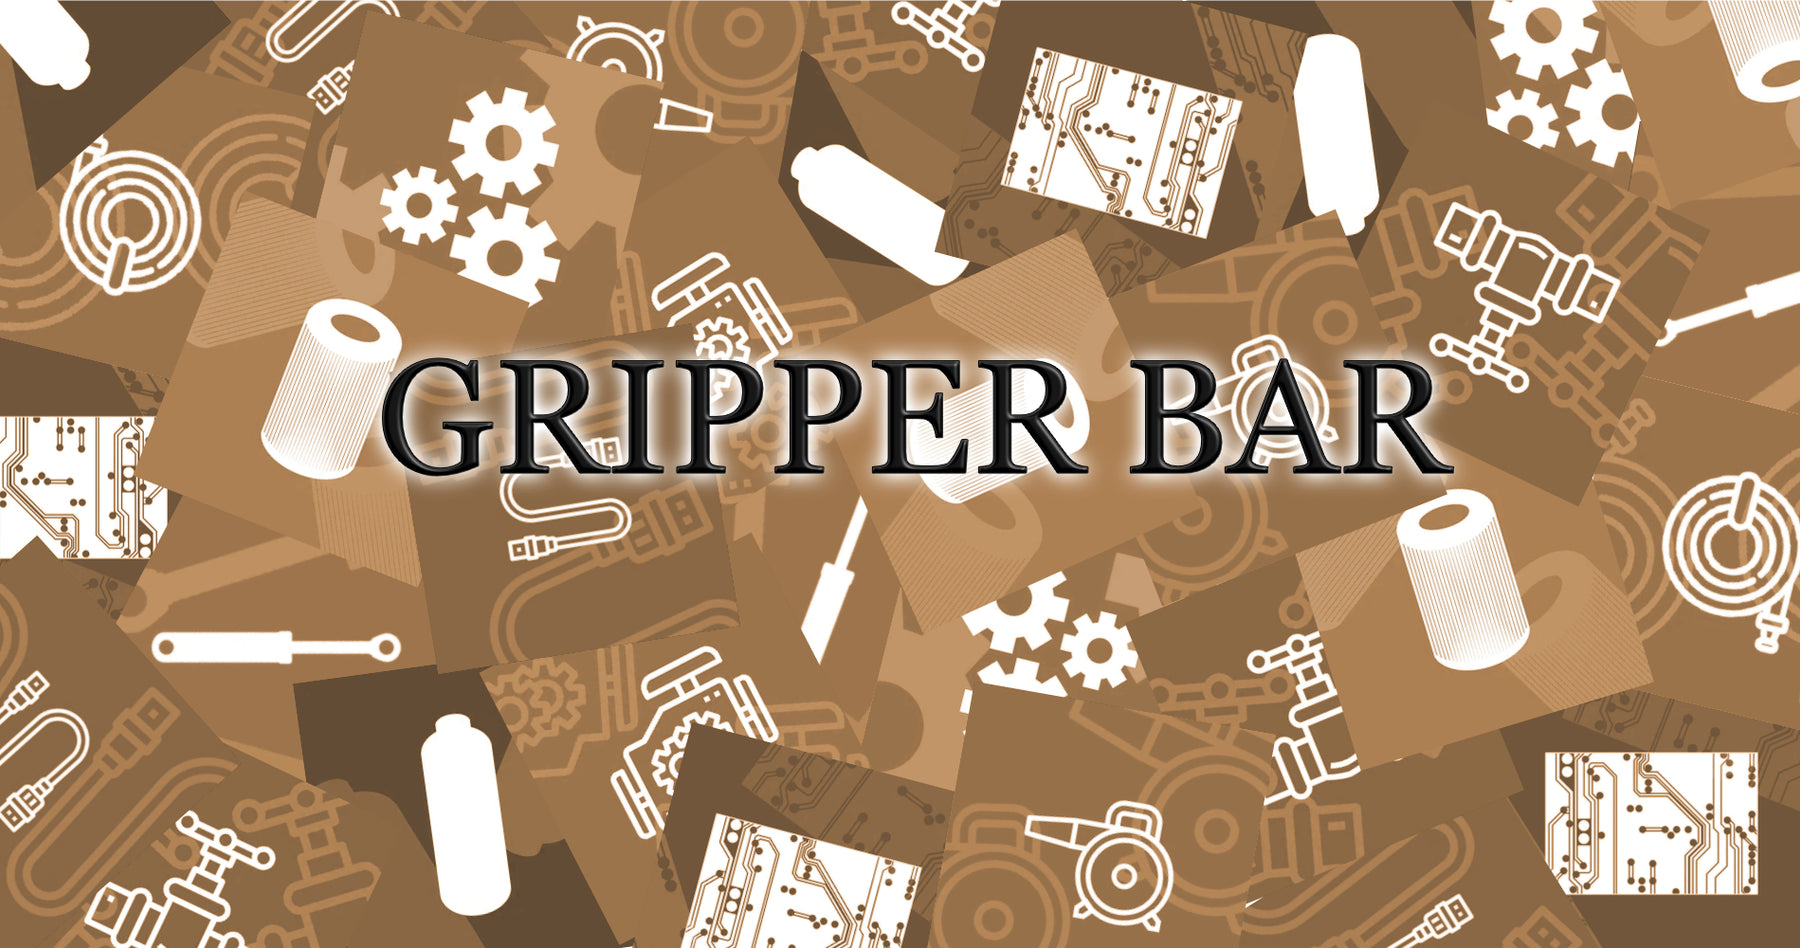 Gripper Bars: Their importance in the Printing Industry